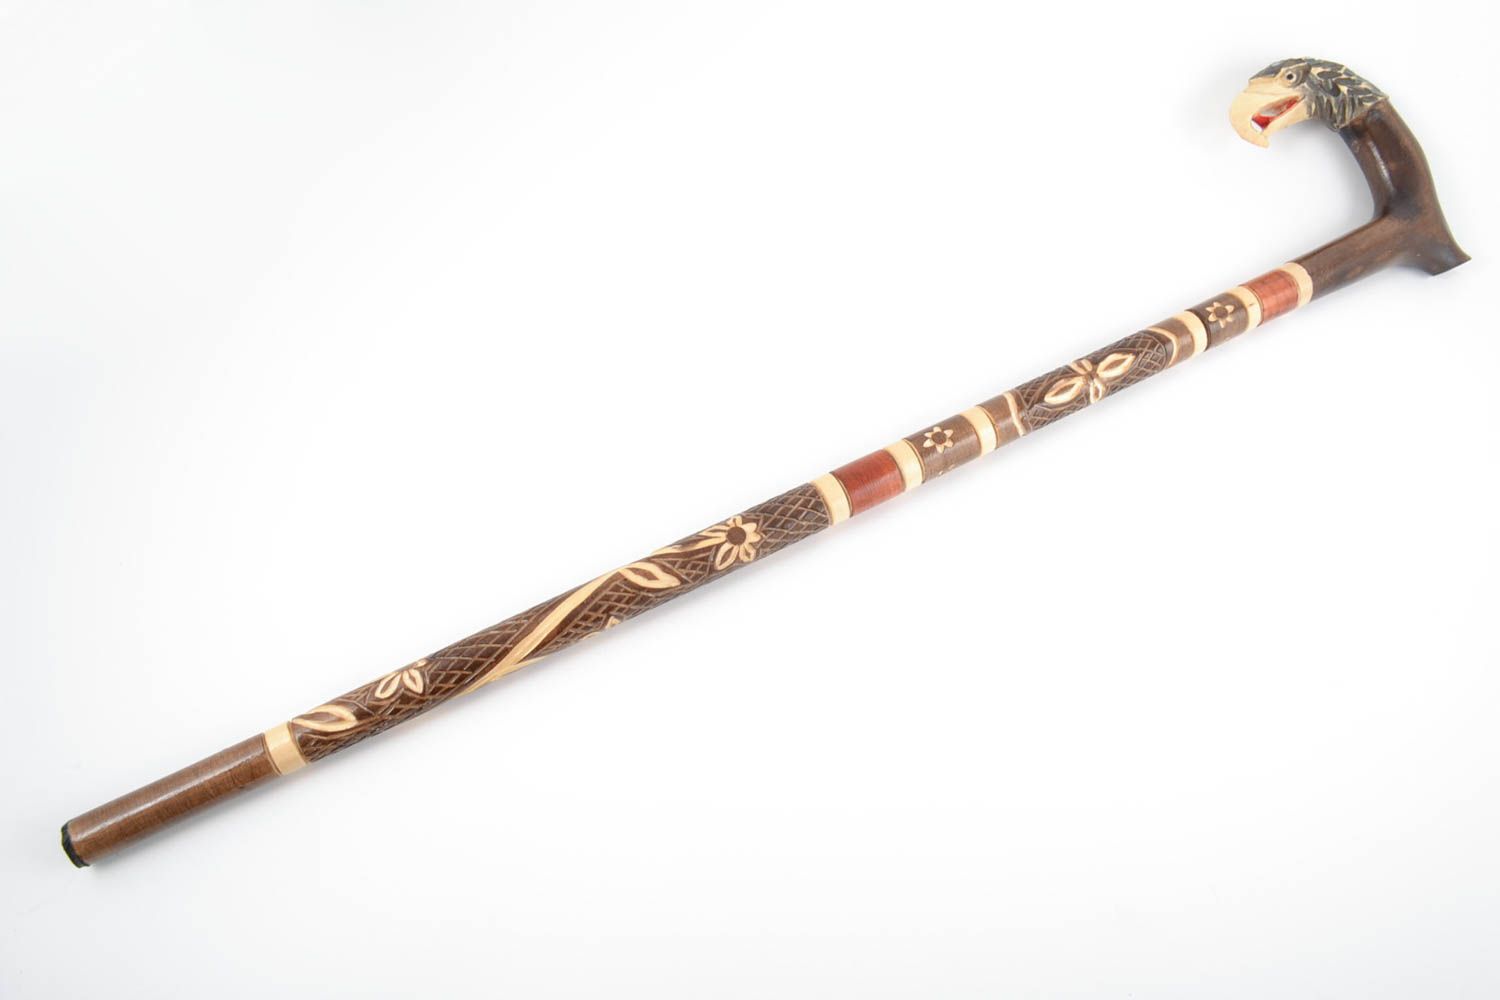 Handmade cane made of wood with knob in the form of eagle stylish walking stick photo 3